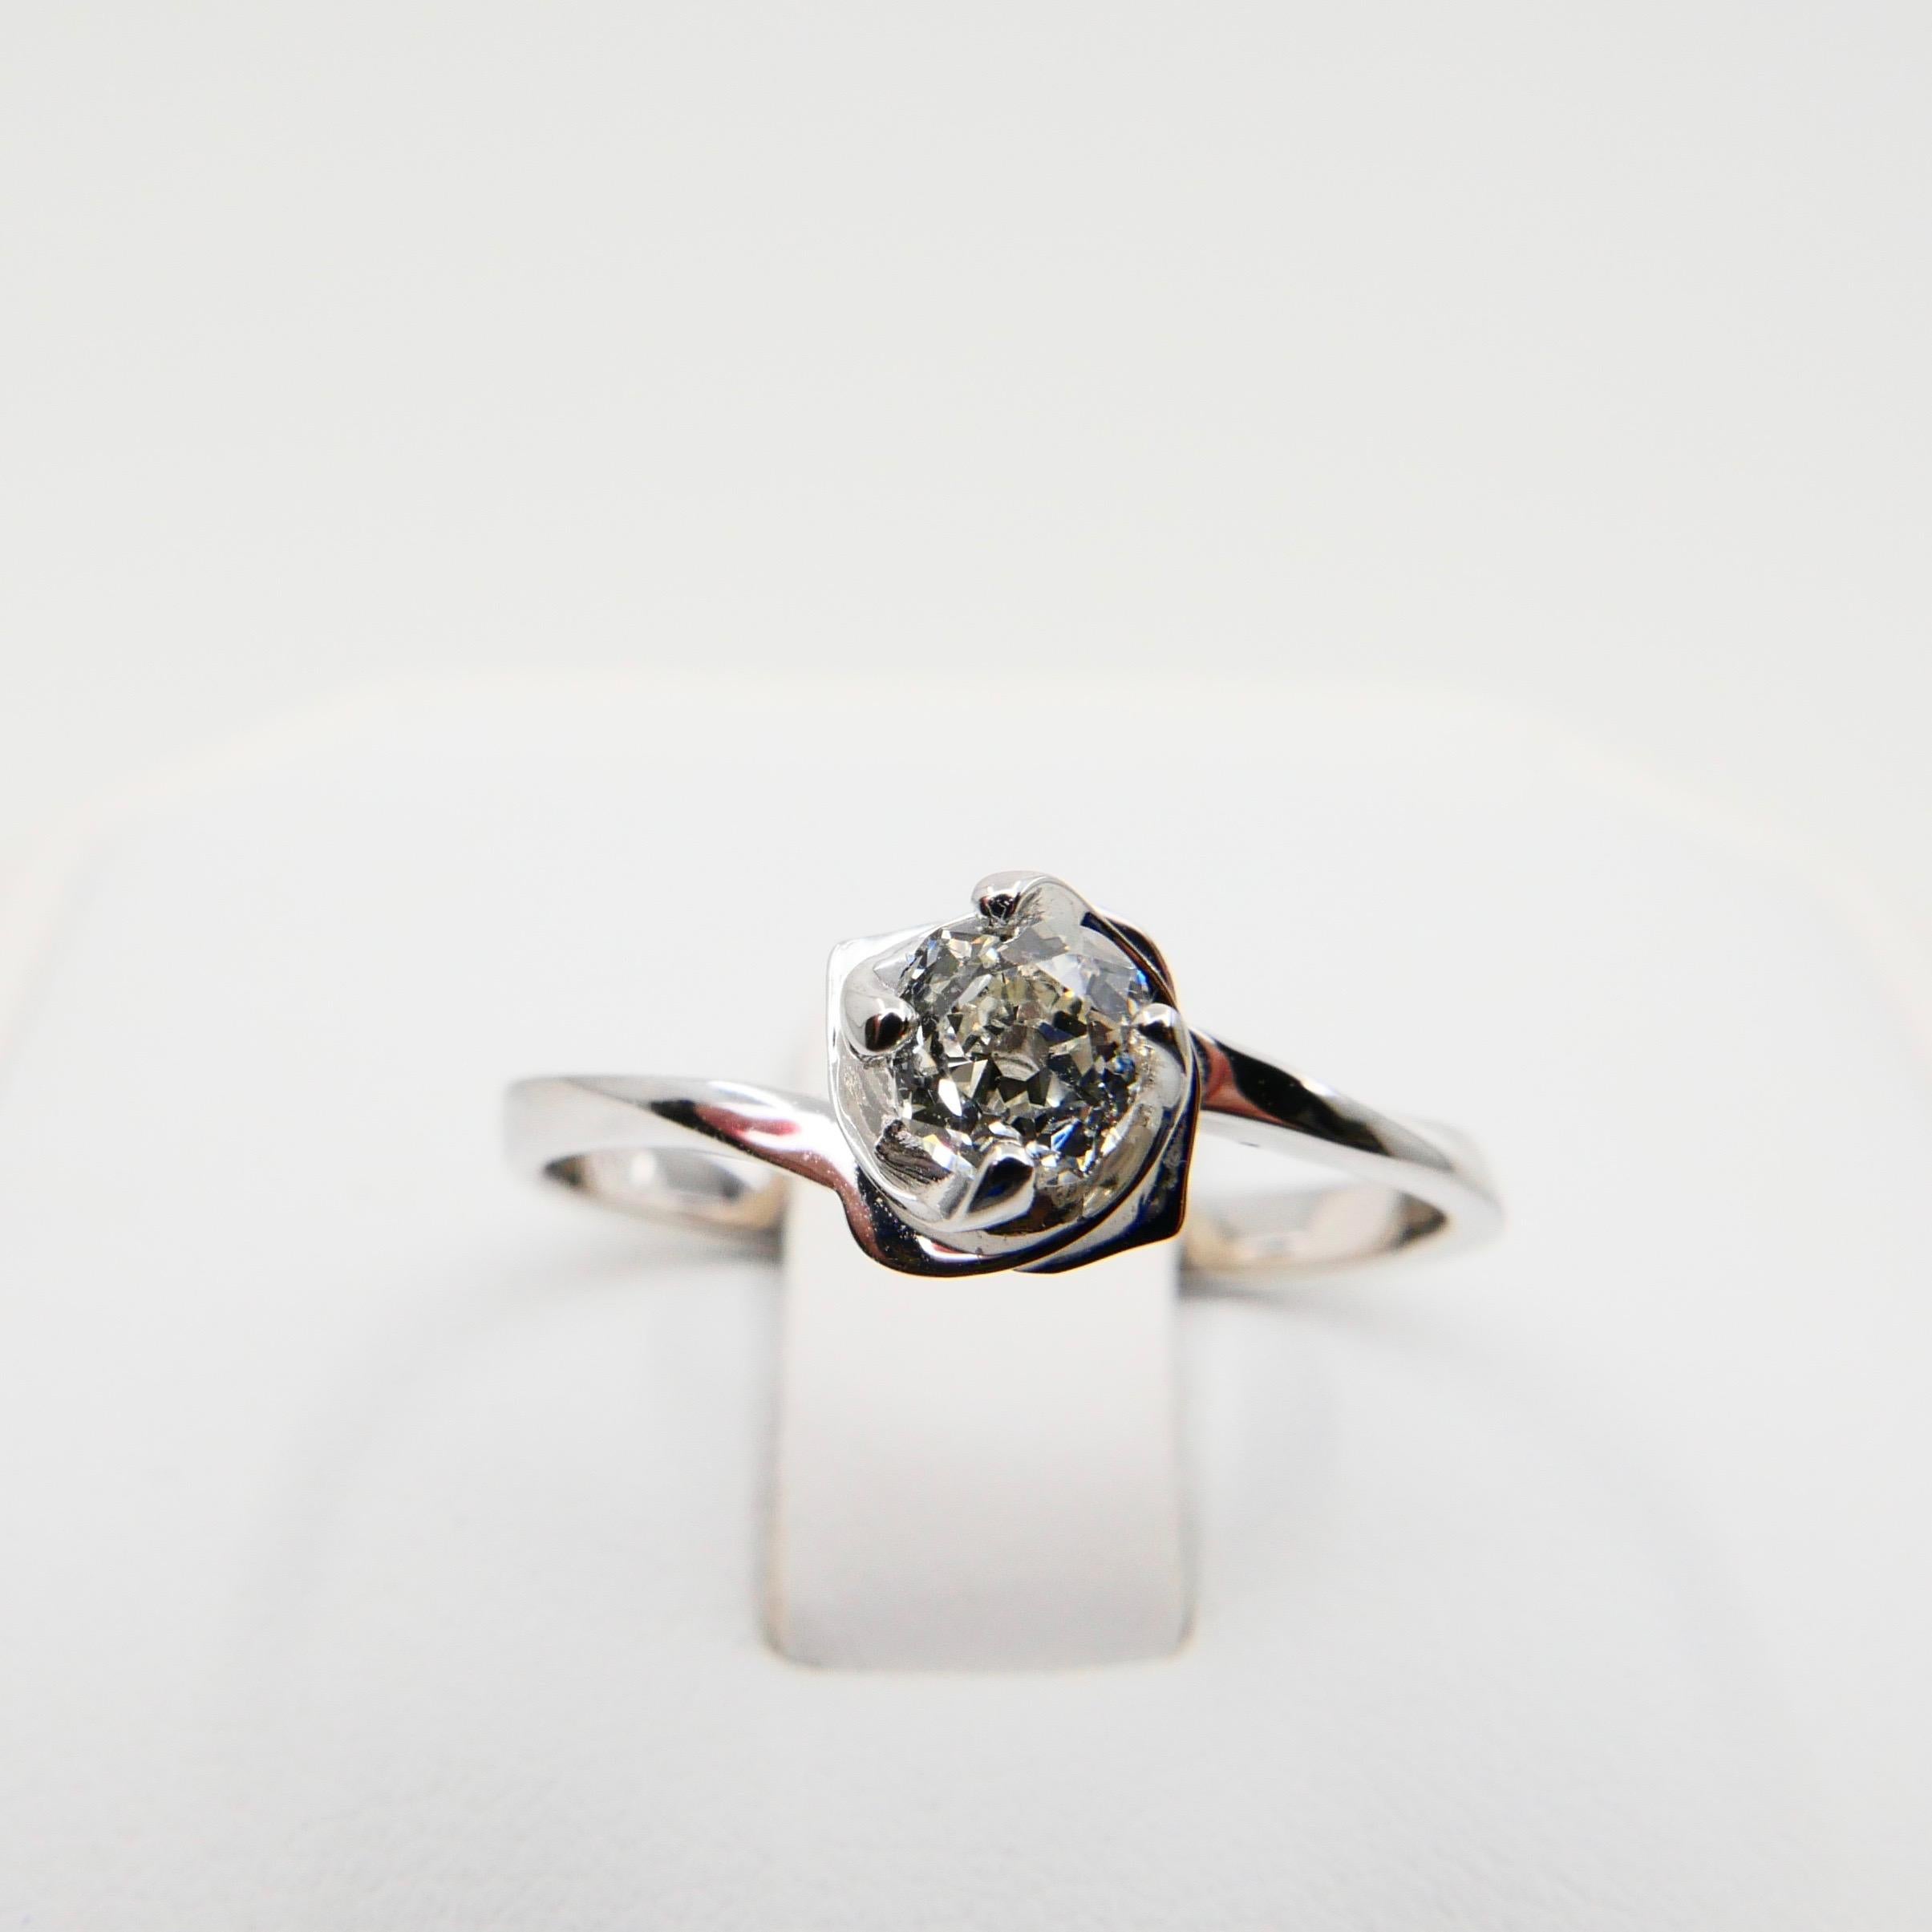 18 Karat White Gold Rose Flower Ring with Old Mine Cut Diamonds, Unique 3D Look 6